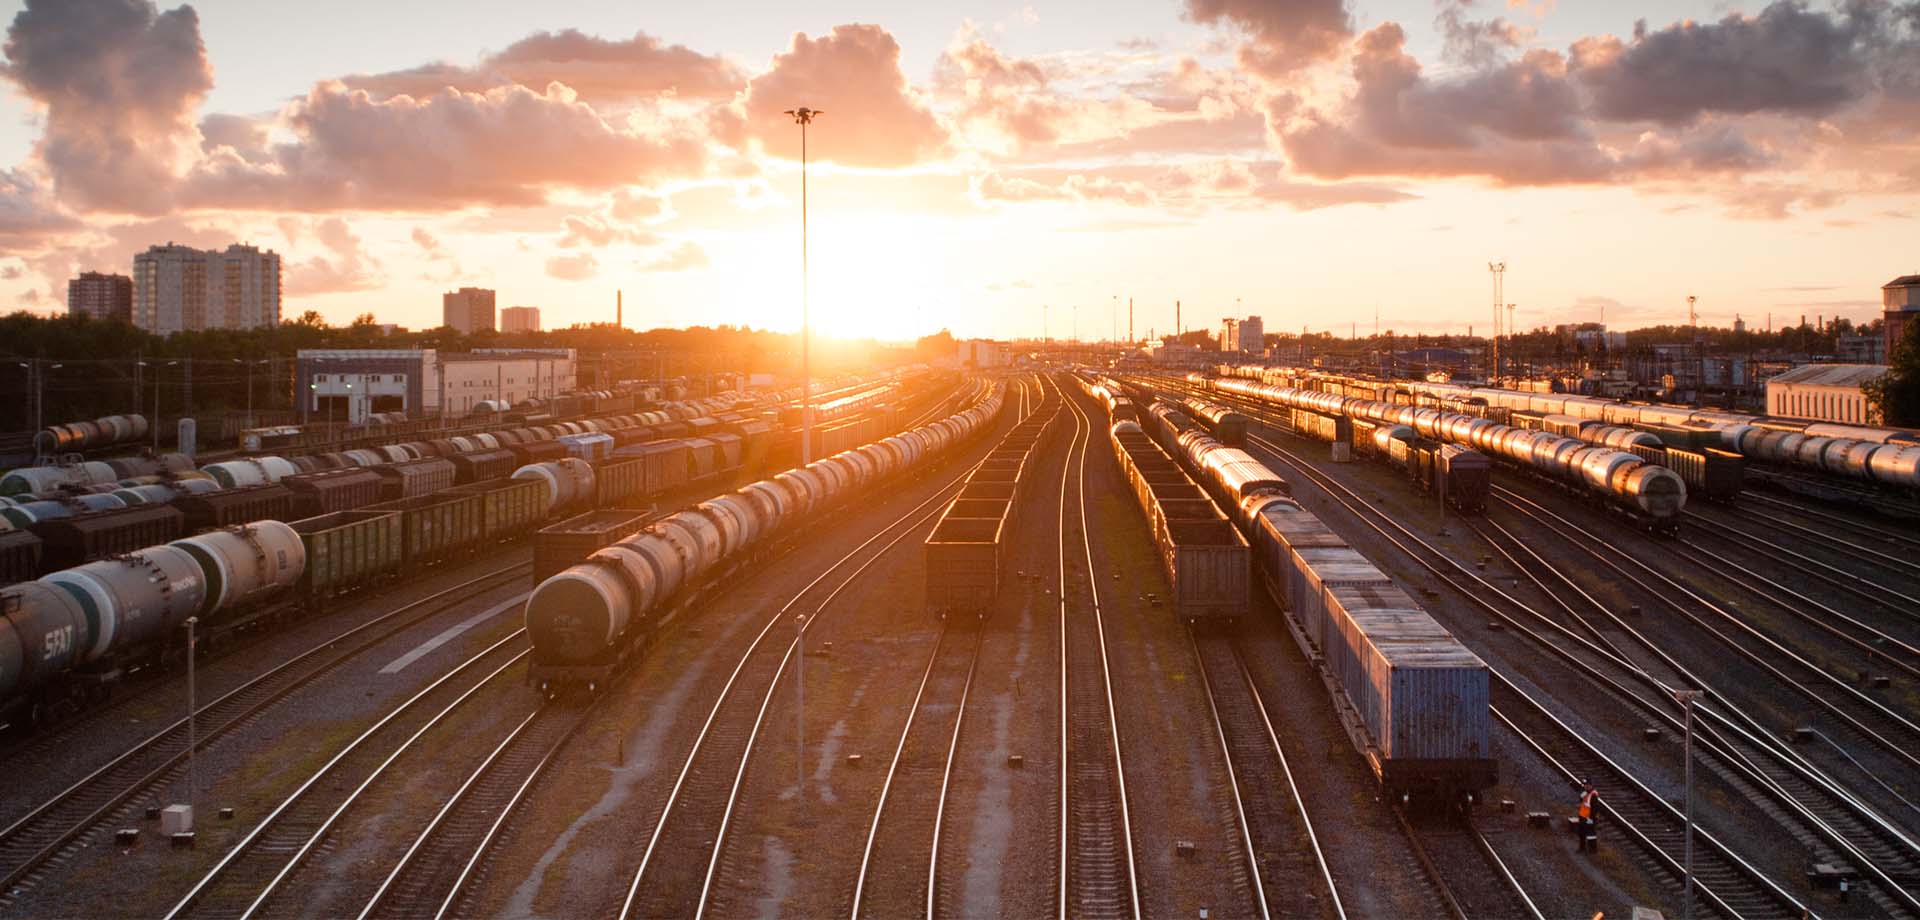 View of a cargo train station during golden hour